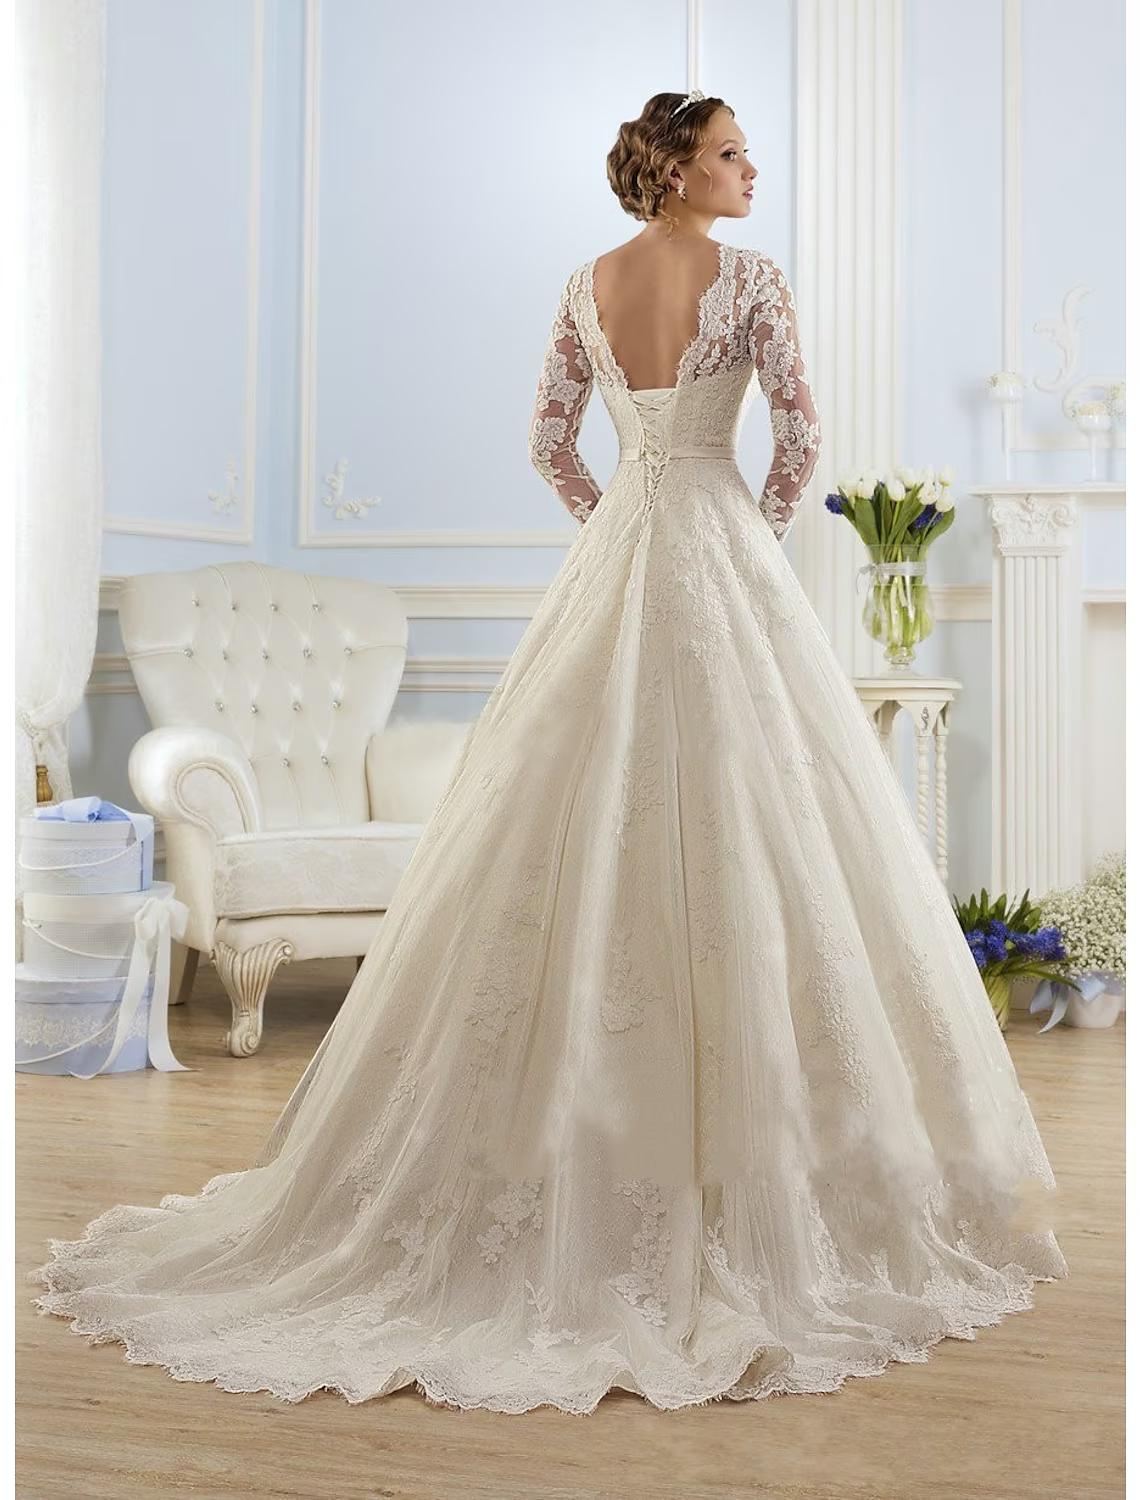 Engagement Formal Wedding Dresses Court Train A-Line Long Sleeve Jewel Neck Lace With Appliques